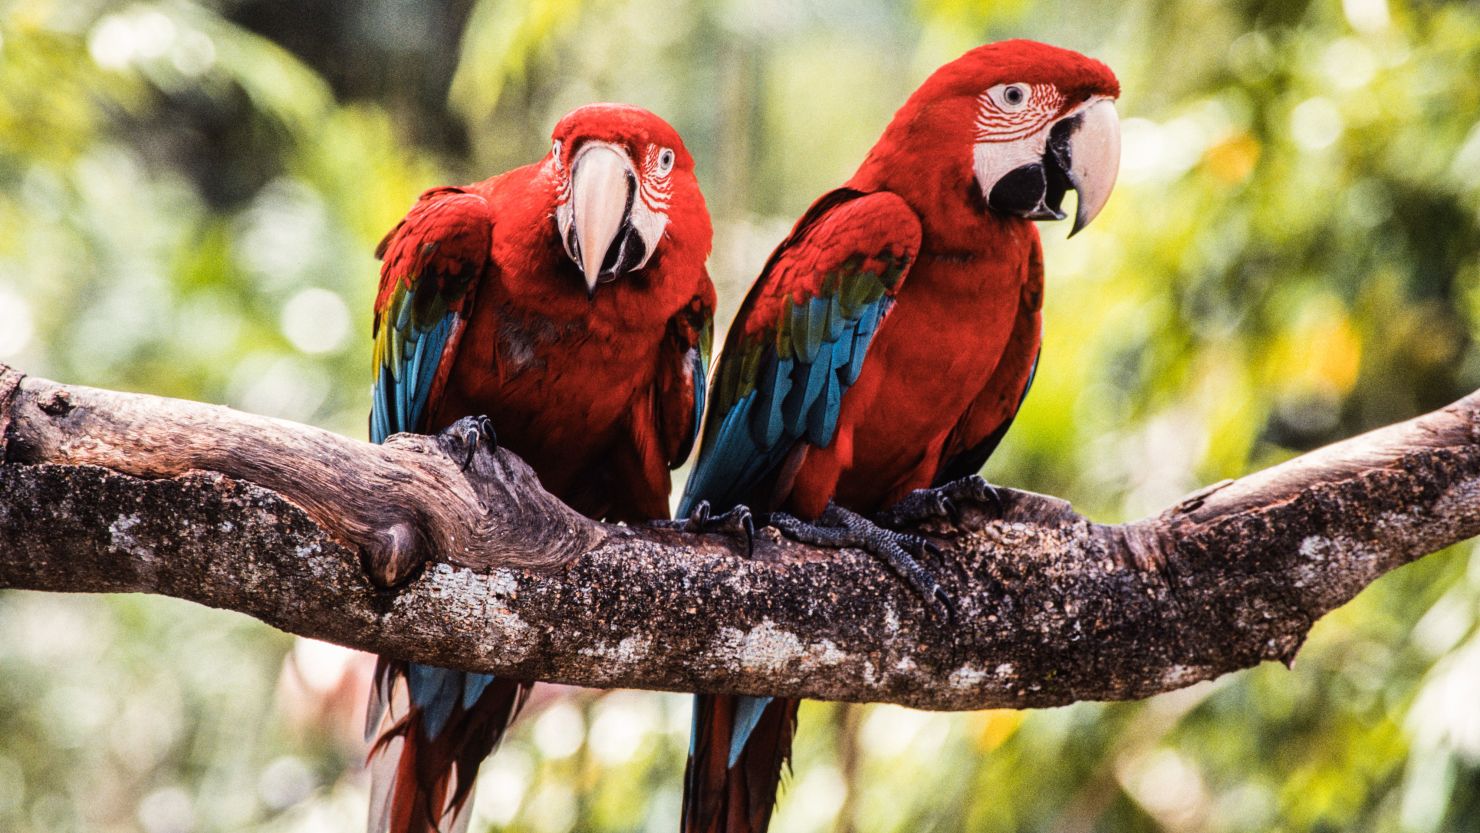 Macaws in the Jurong Bird Park in Singapore.